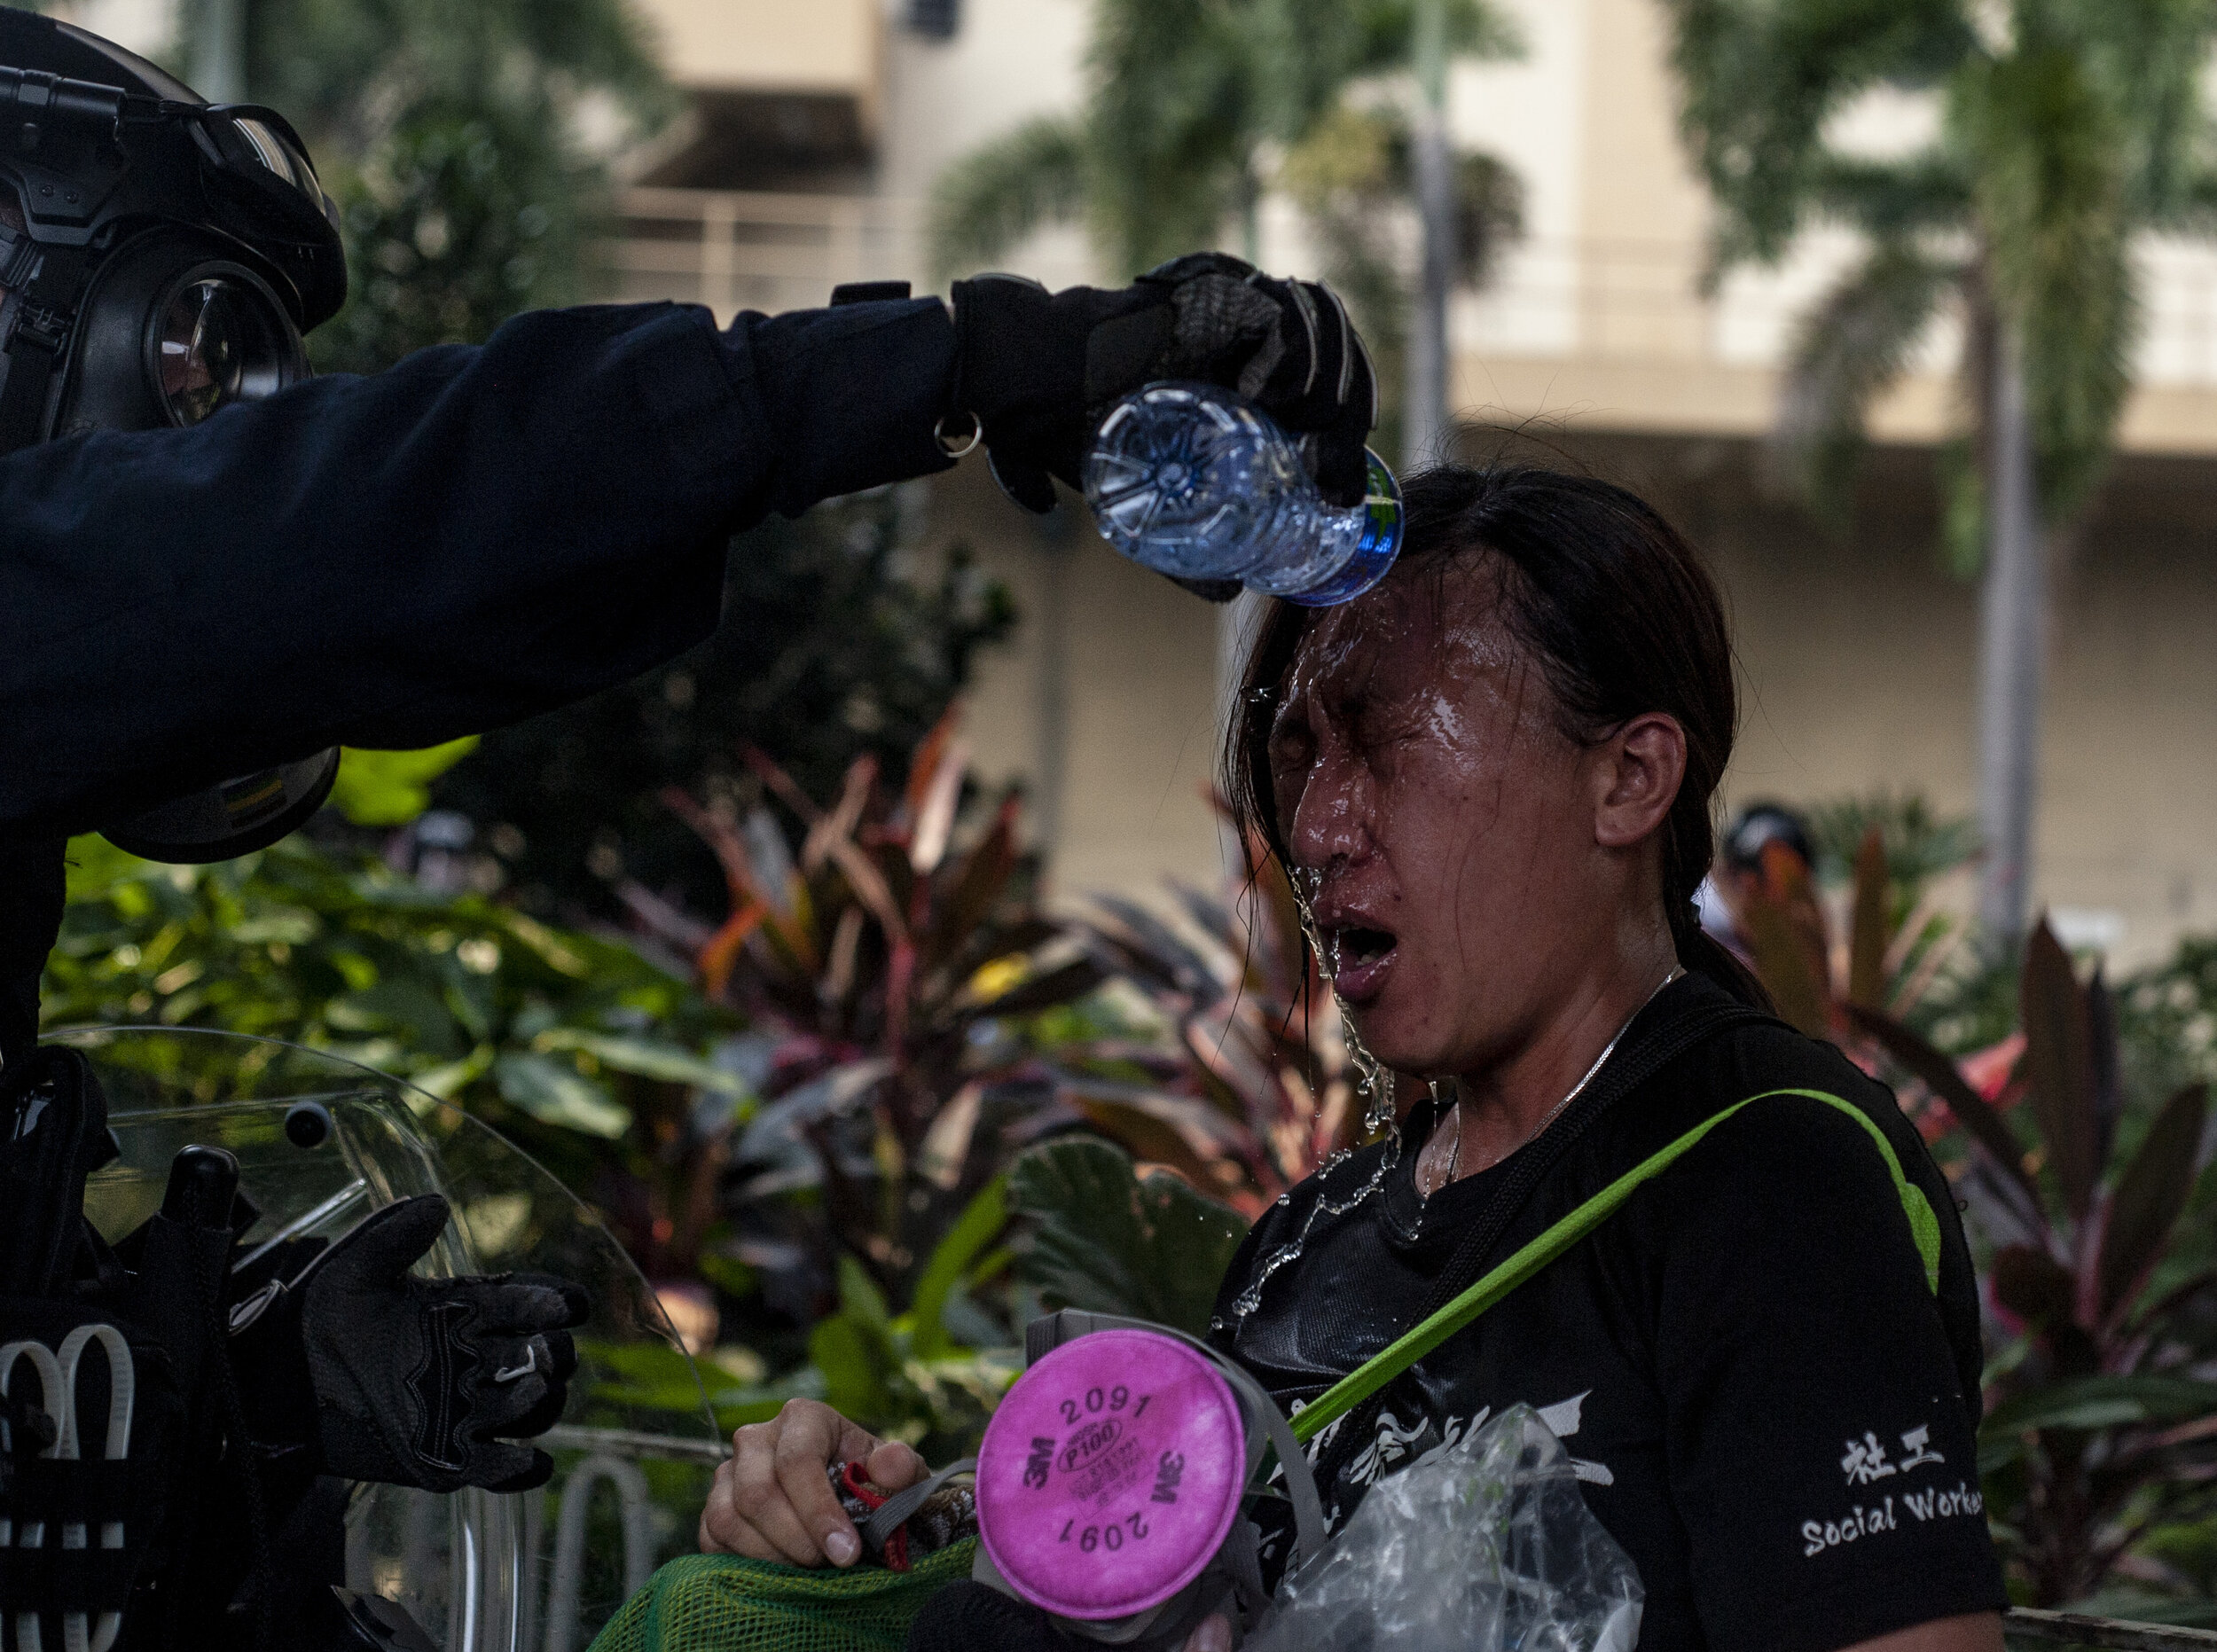  A police officer washes out a protester’s eyes after she was sprayed point blank with pepper spray during heavy clashes between police and protesters in Kwun Tong on August 24, 2019. Police expended hundreds of tear gas canisters as they fought to p